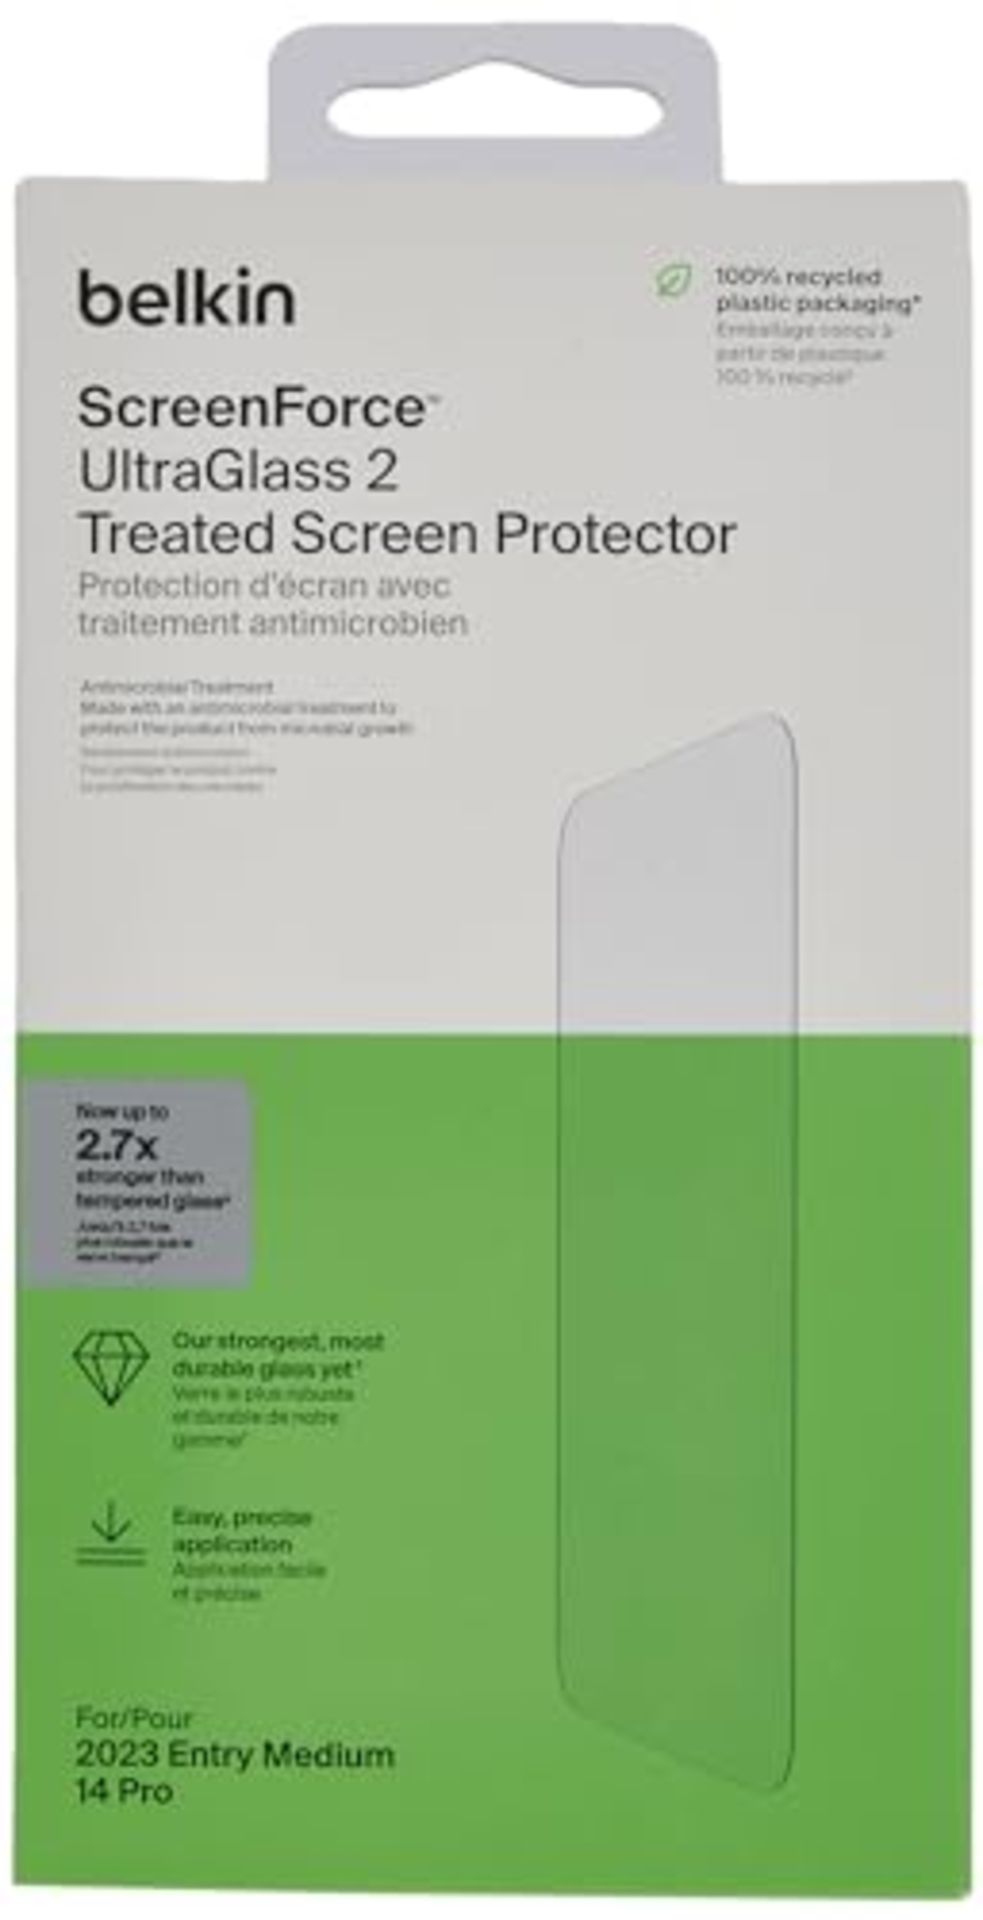 Belkin ScreenForce UltraGlass 2 Antimicrobial Screen Protector, glass for iPhone 15, s